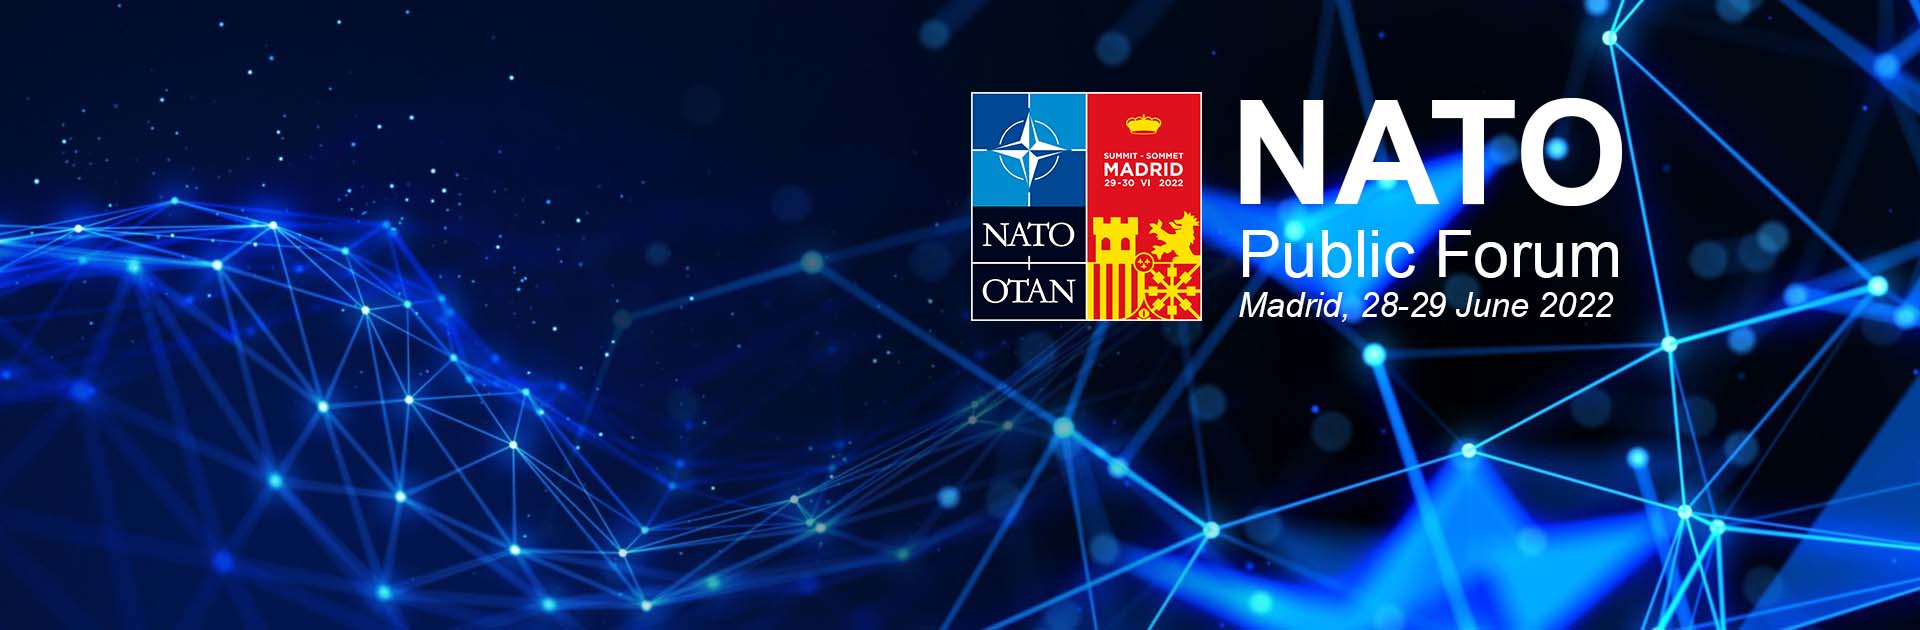 Logo of the NATO Public Forum which will be held from 28 to 29 June 2022 in Madrid, Spain